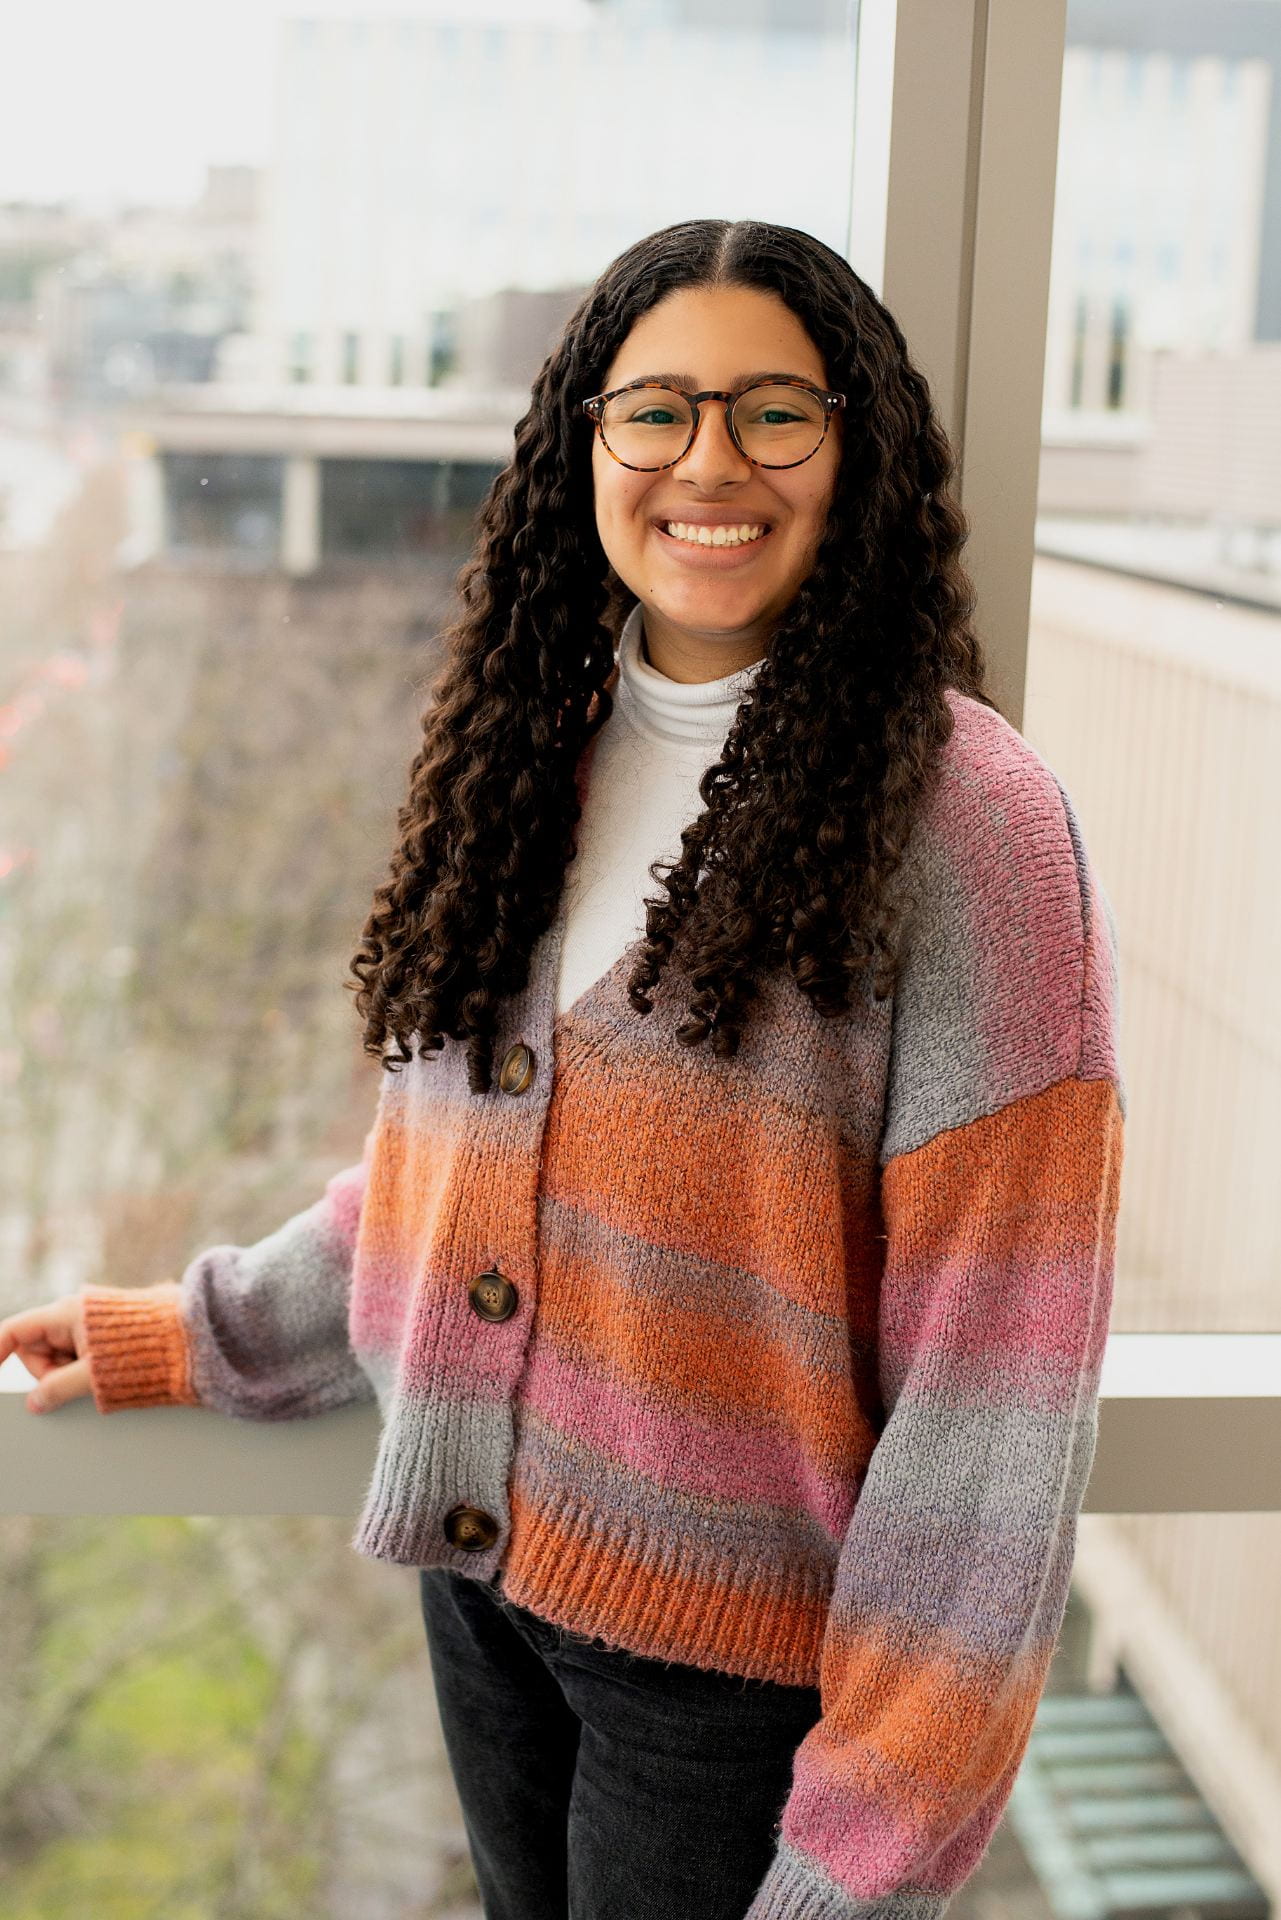 A woman with glasses and long, dark brown, curly hair, wearing a colorful sweater.